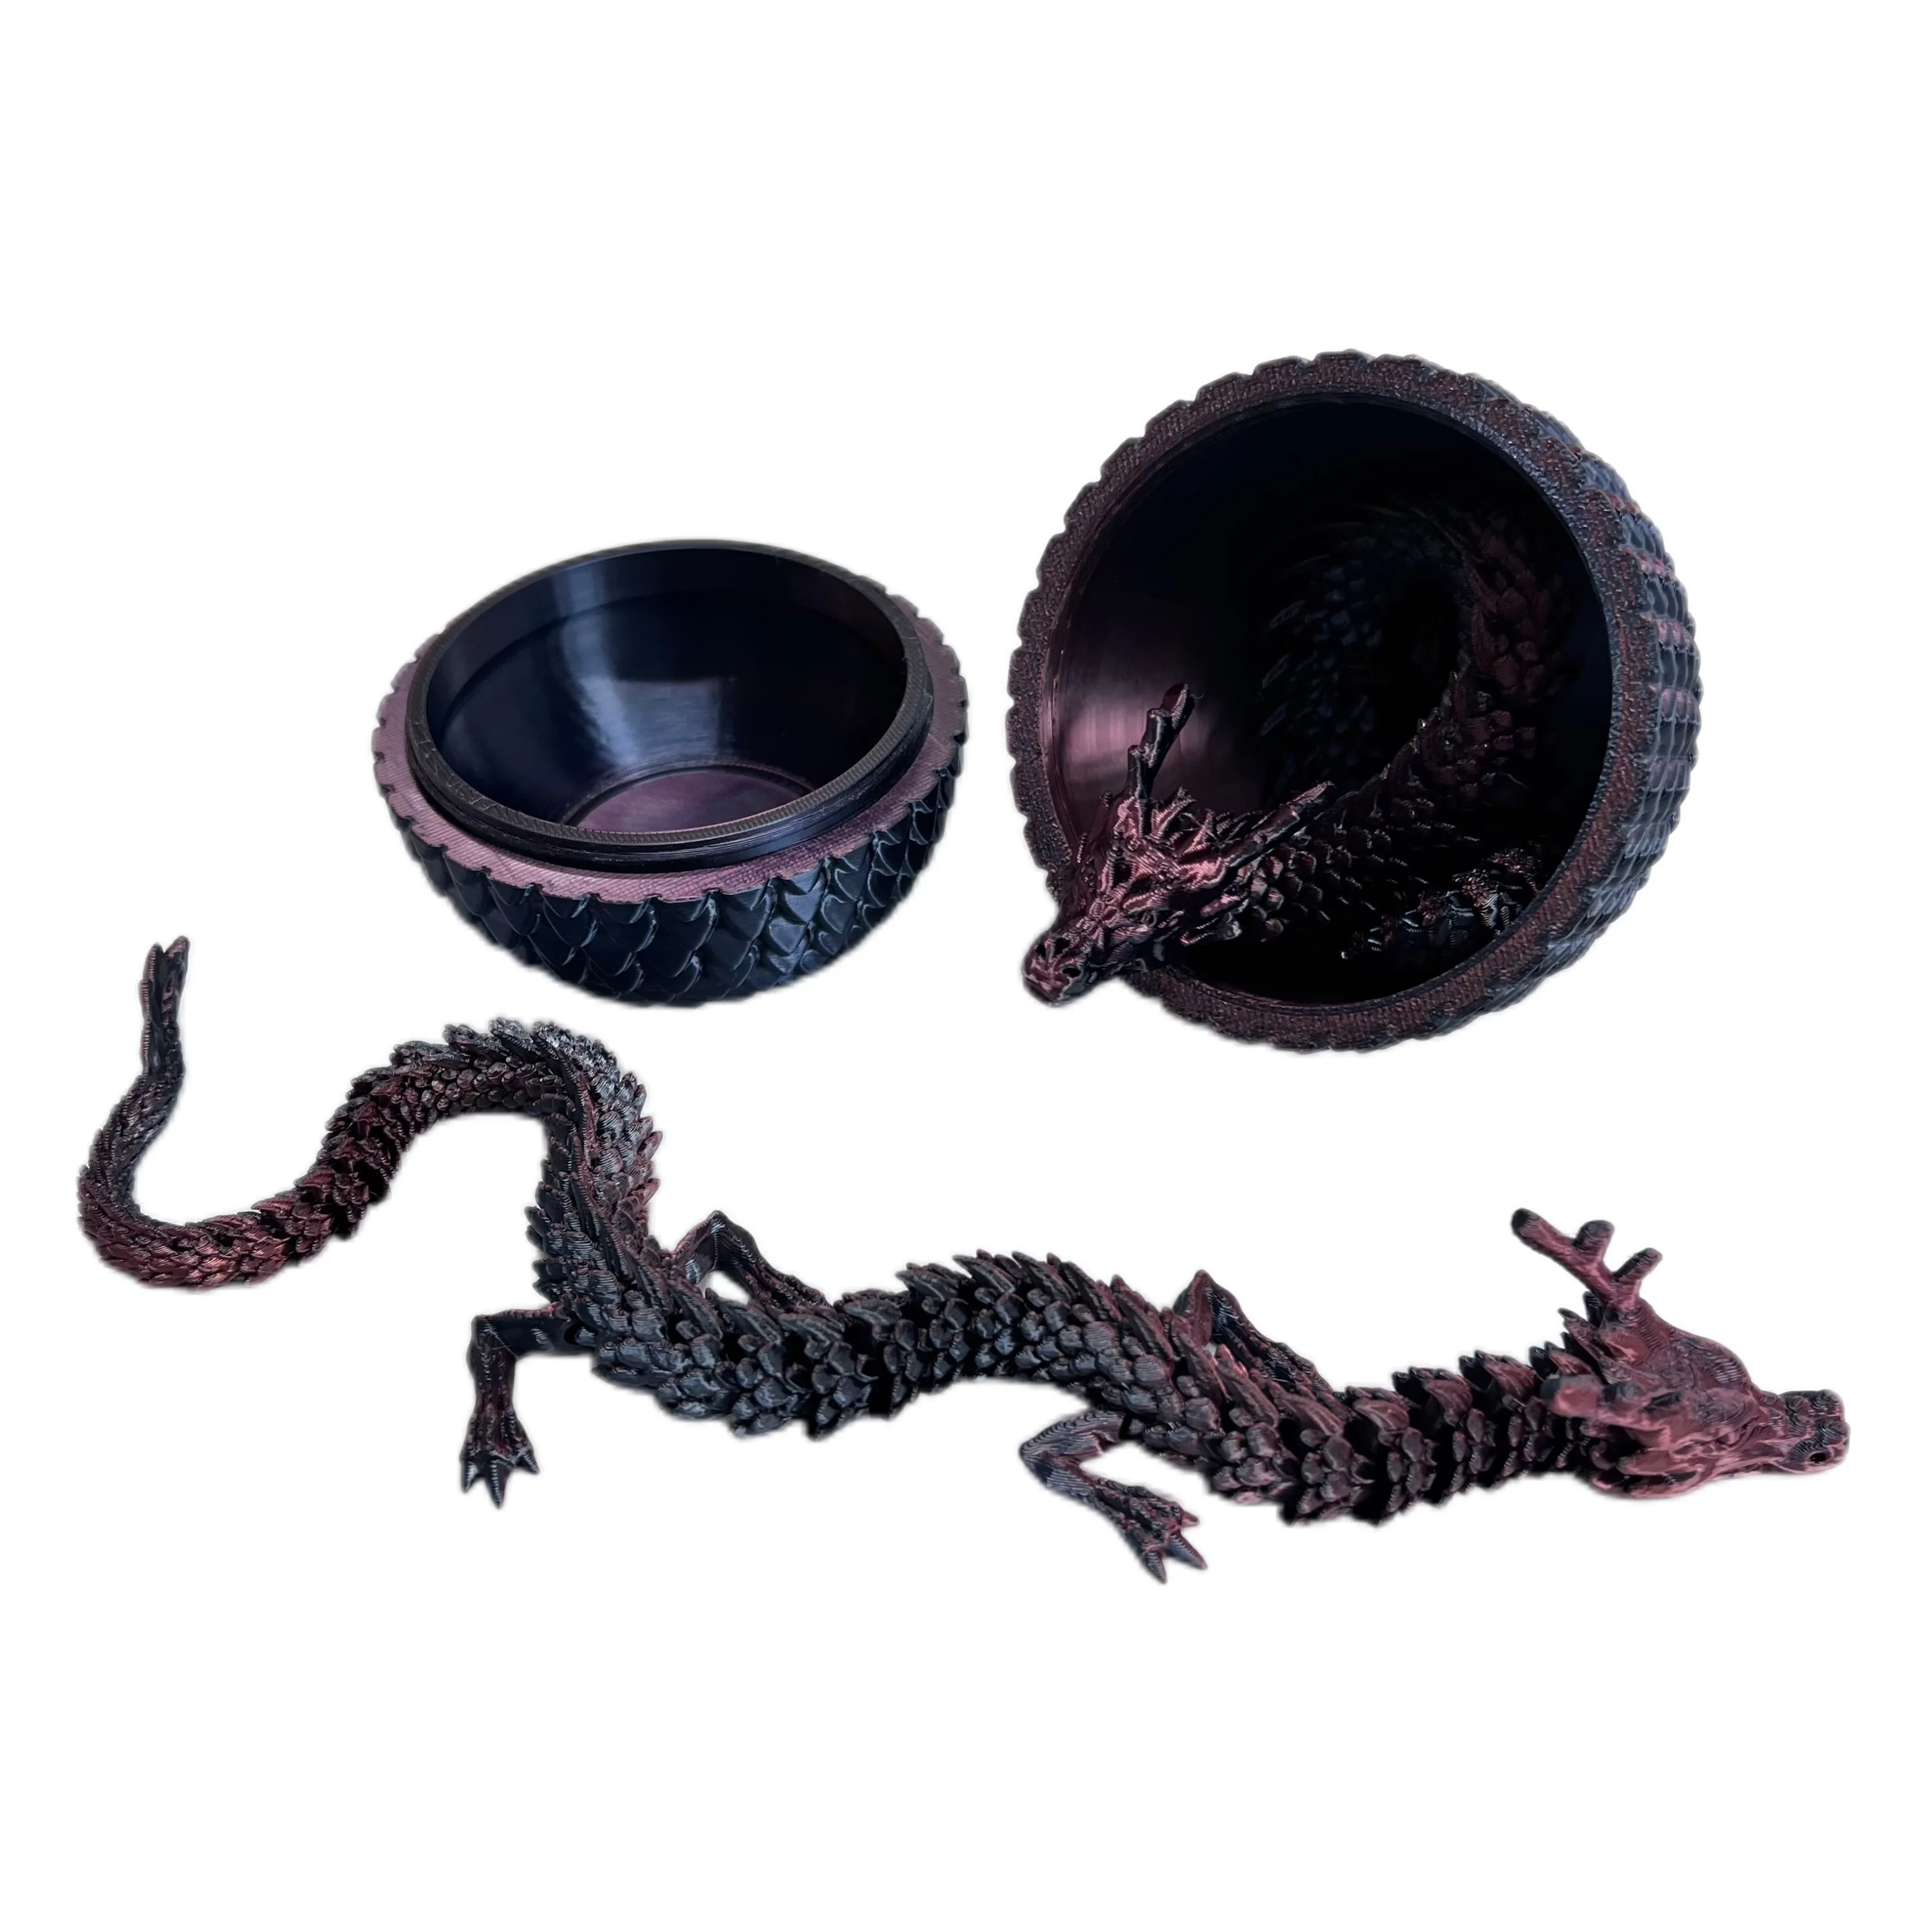 Chinese Dragon Quick Sample Can Customize 3D Printing Processing Service FDM Plastic 3D Printing Chinese Dragon and Dragon Egg